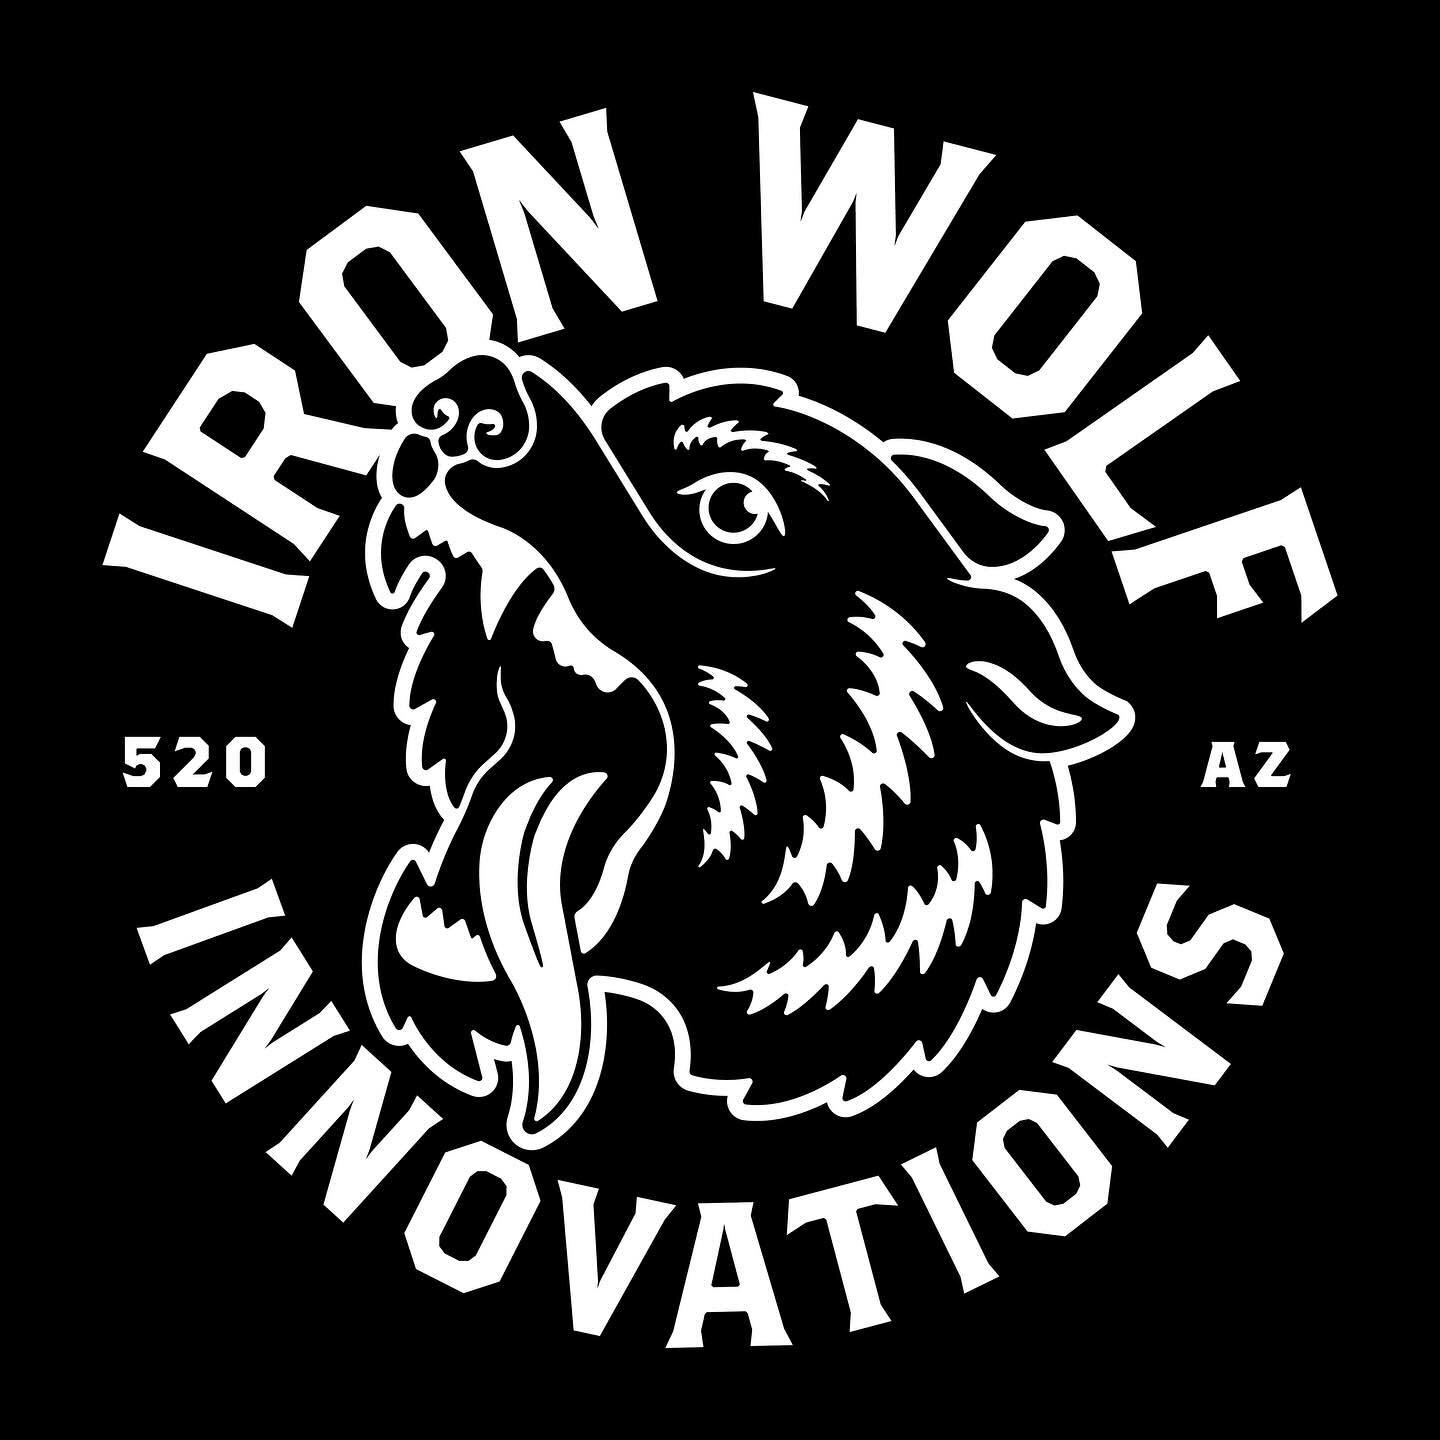 Steady at the helm. 

@ncatalfamodesign KILLED the delivery on this. Your perspective helped bring Iron Wolf to life! Cheers to 2024.